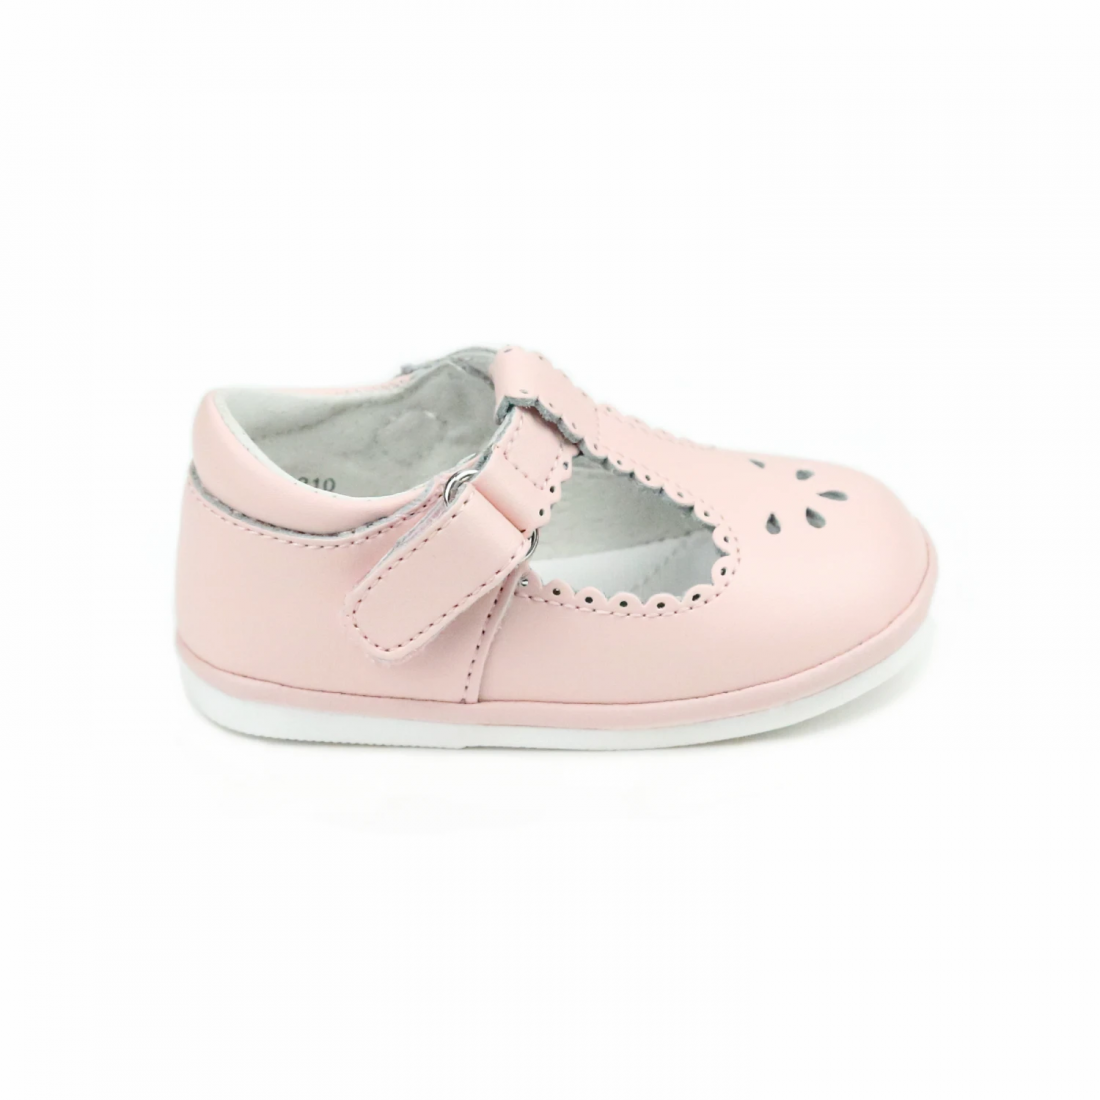 Dottie Scalloped Perforated Mary Jane Pink